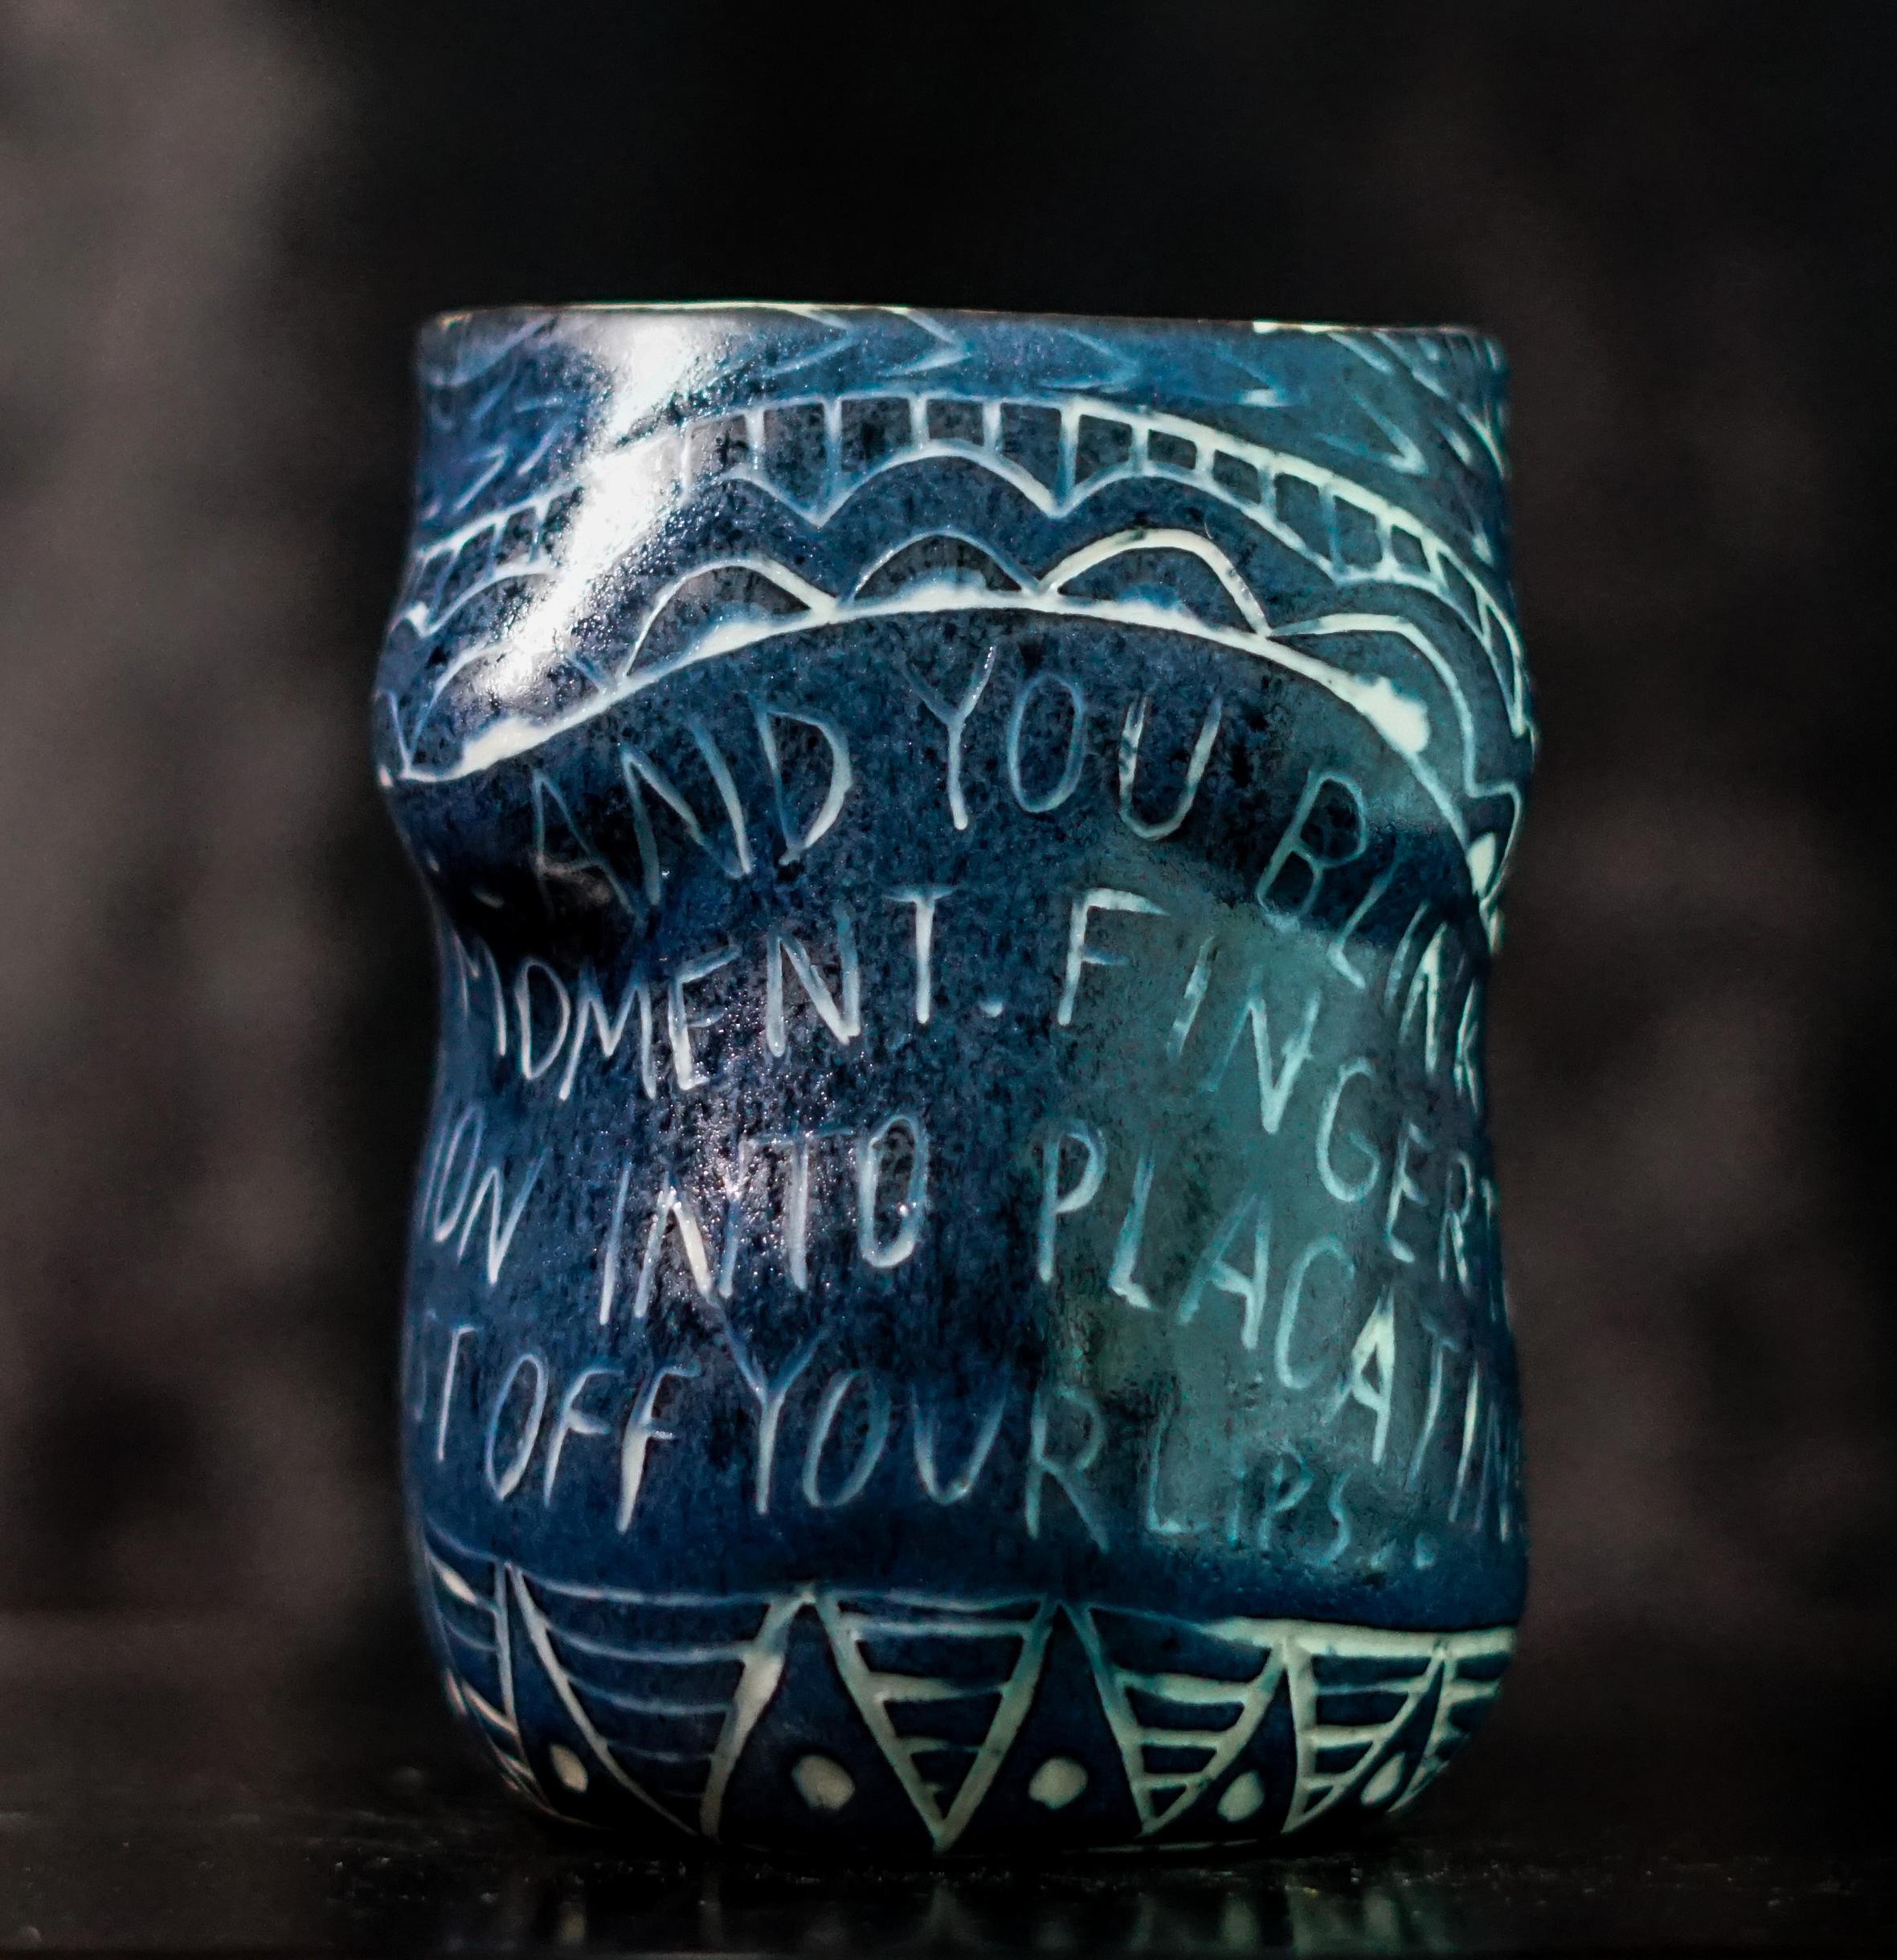 Alex Hodge Abstract Sculpture - “And You Blink..” Porcelain cup with sgraffito detailing by the artist